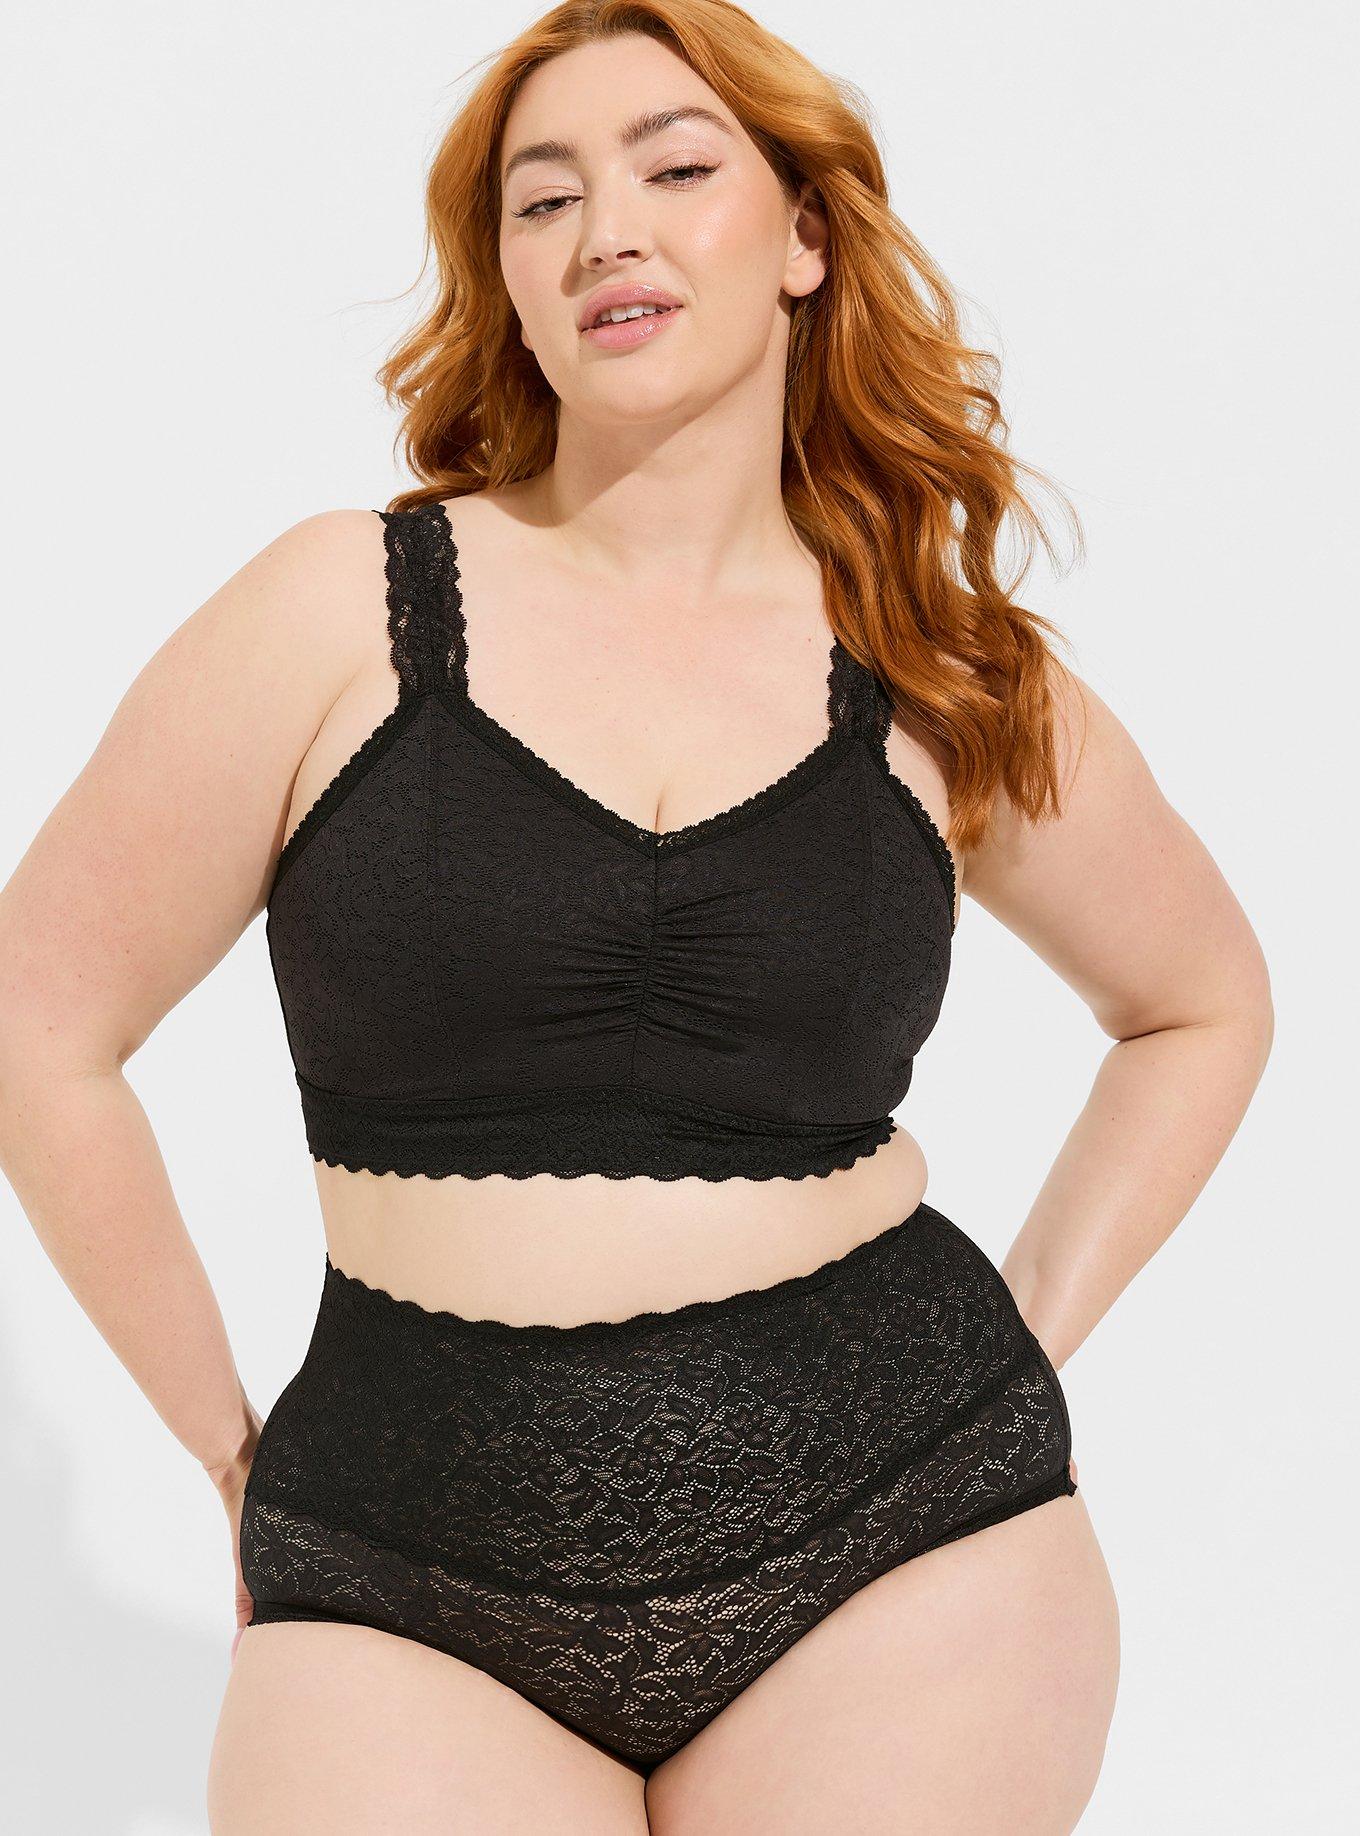 Torrid 4-Way Stretch Lace Brief Panty. in 2023